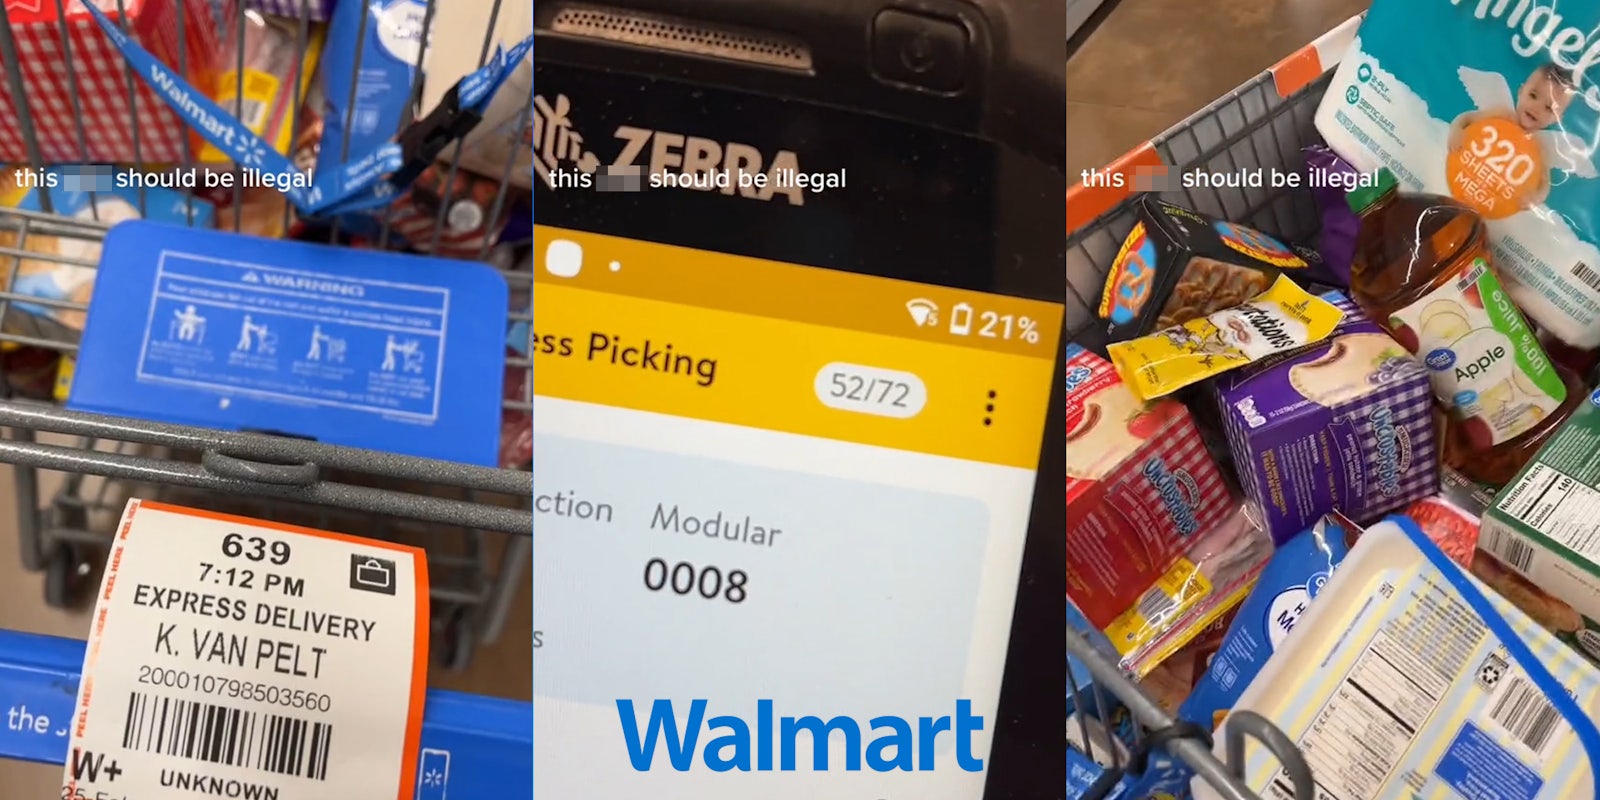 Walmart cart full of groceries with tag on handle 'EXPRESS DELIVERY' with caption 'this blank should be illegal' (l) Zebra scanner displaying 52/72 items with caption 'this blank should be illegal' with Walmart logo at bottom (c) Walmart cart full of groceries with caption 'this blank should be illegal' (r)